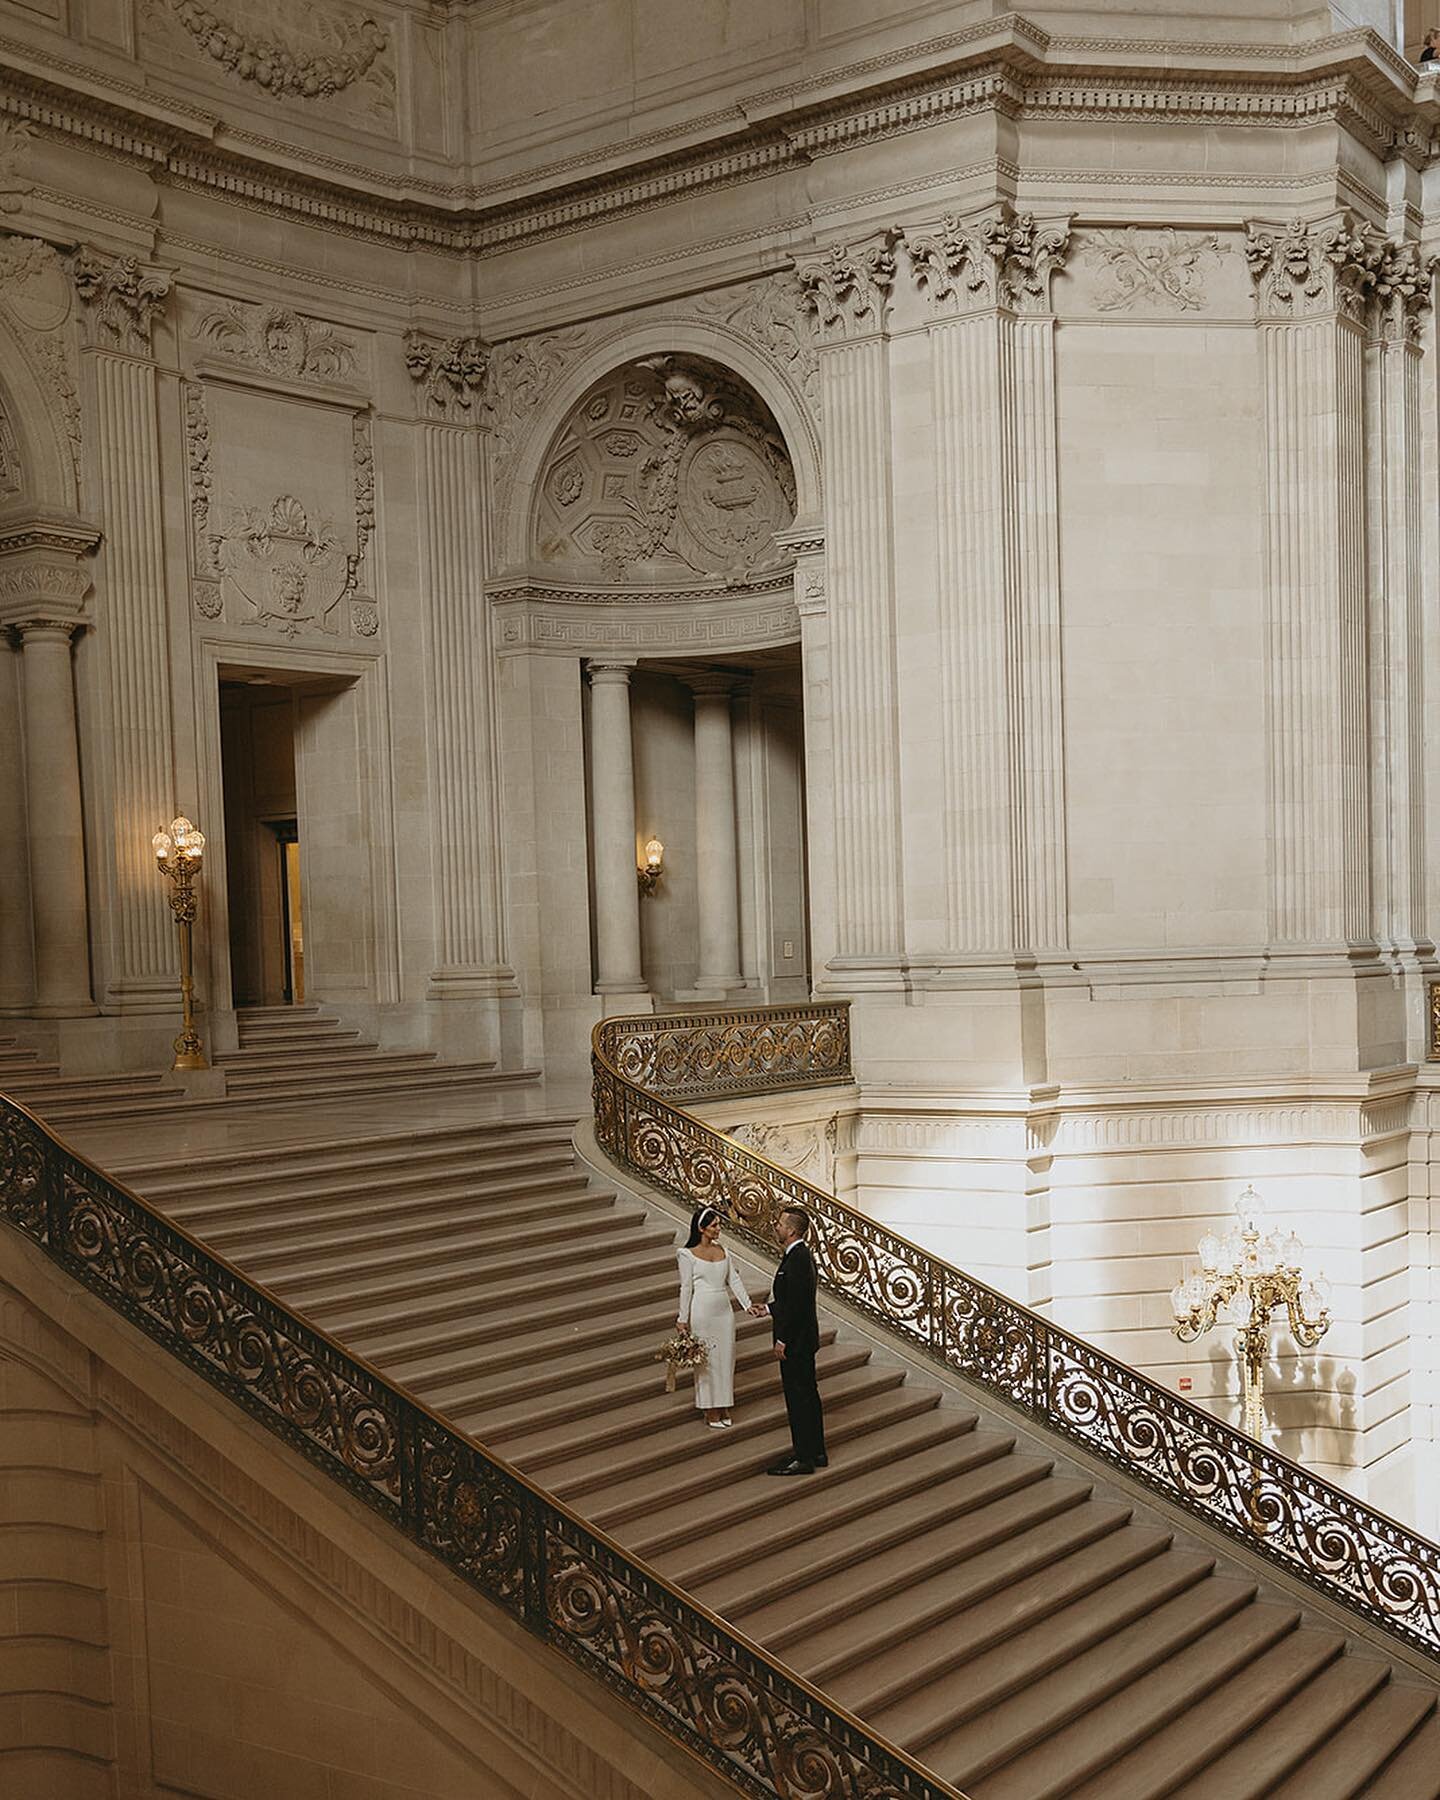 San Francisco city hall, truly one of the most beautiful buildings to get married in. Congrats to Alex &amp; Kaleb 🥂

Photography by @annaaelizabethphoto